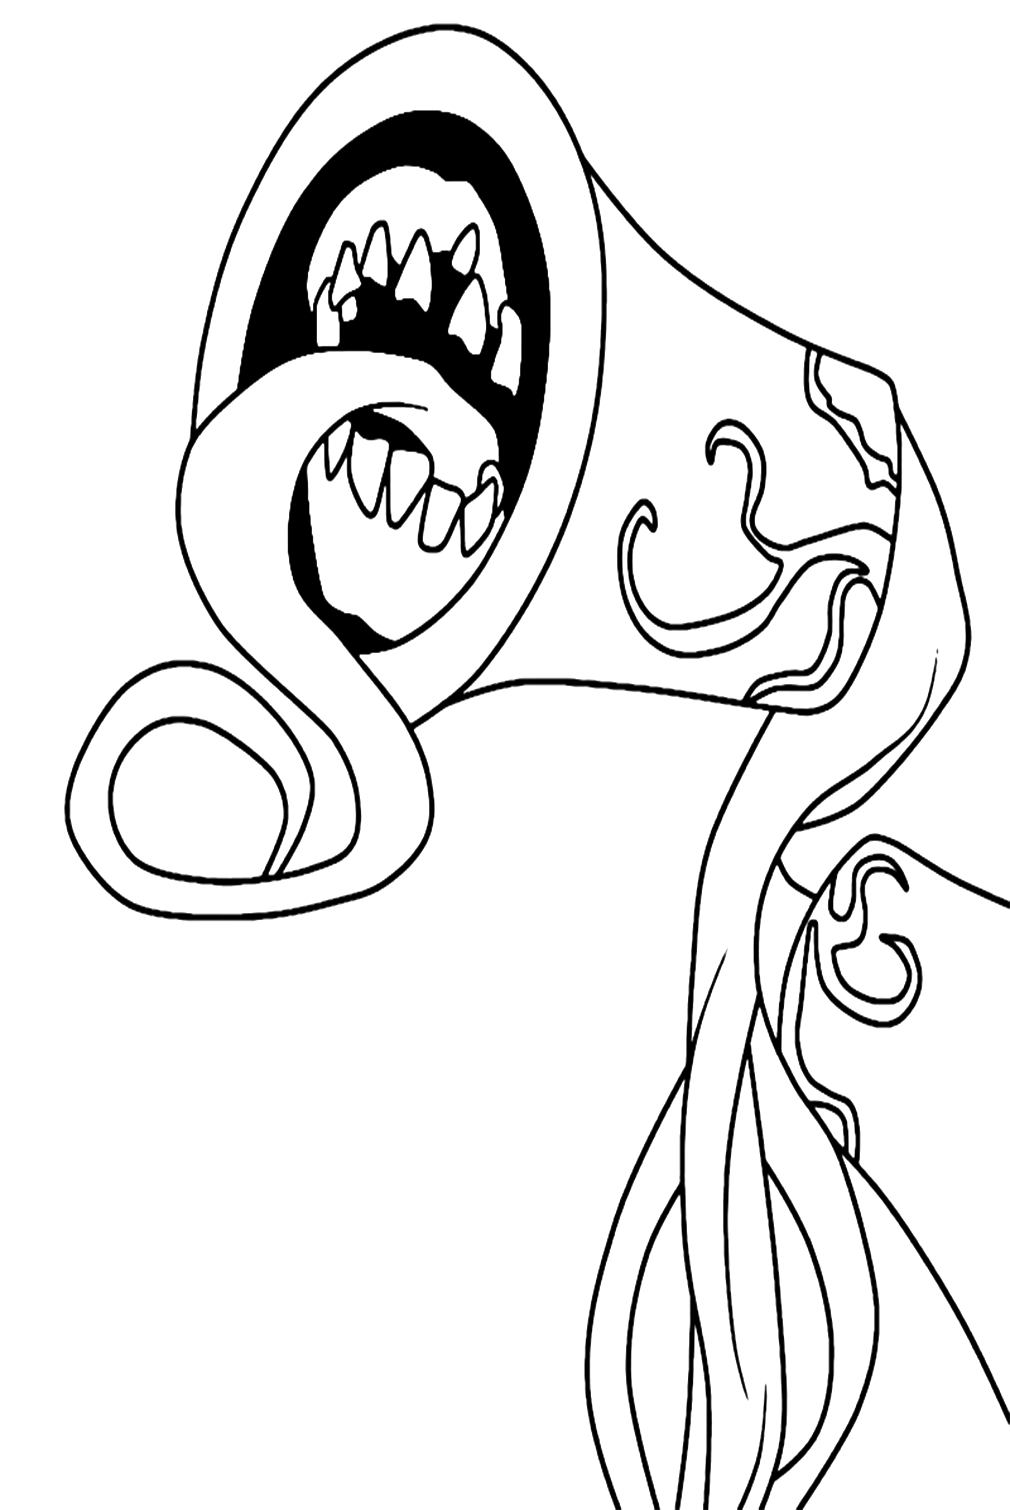 Siren Head Looks Scary Coloring Page